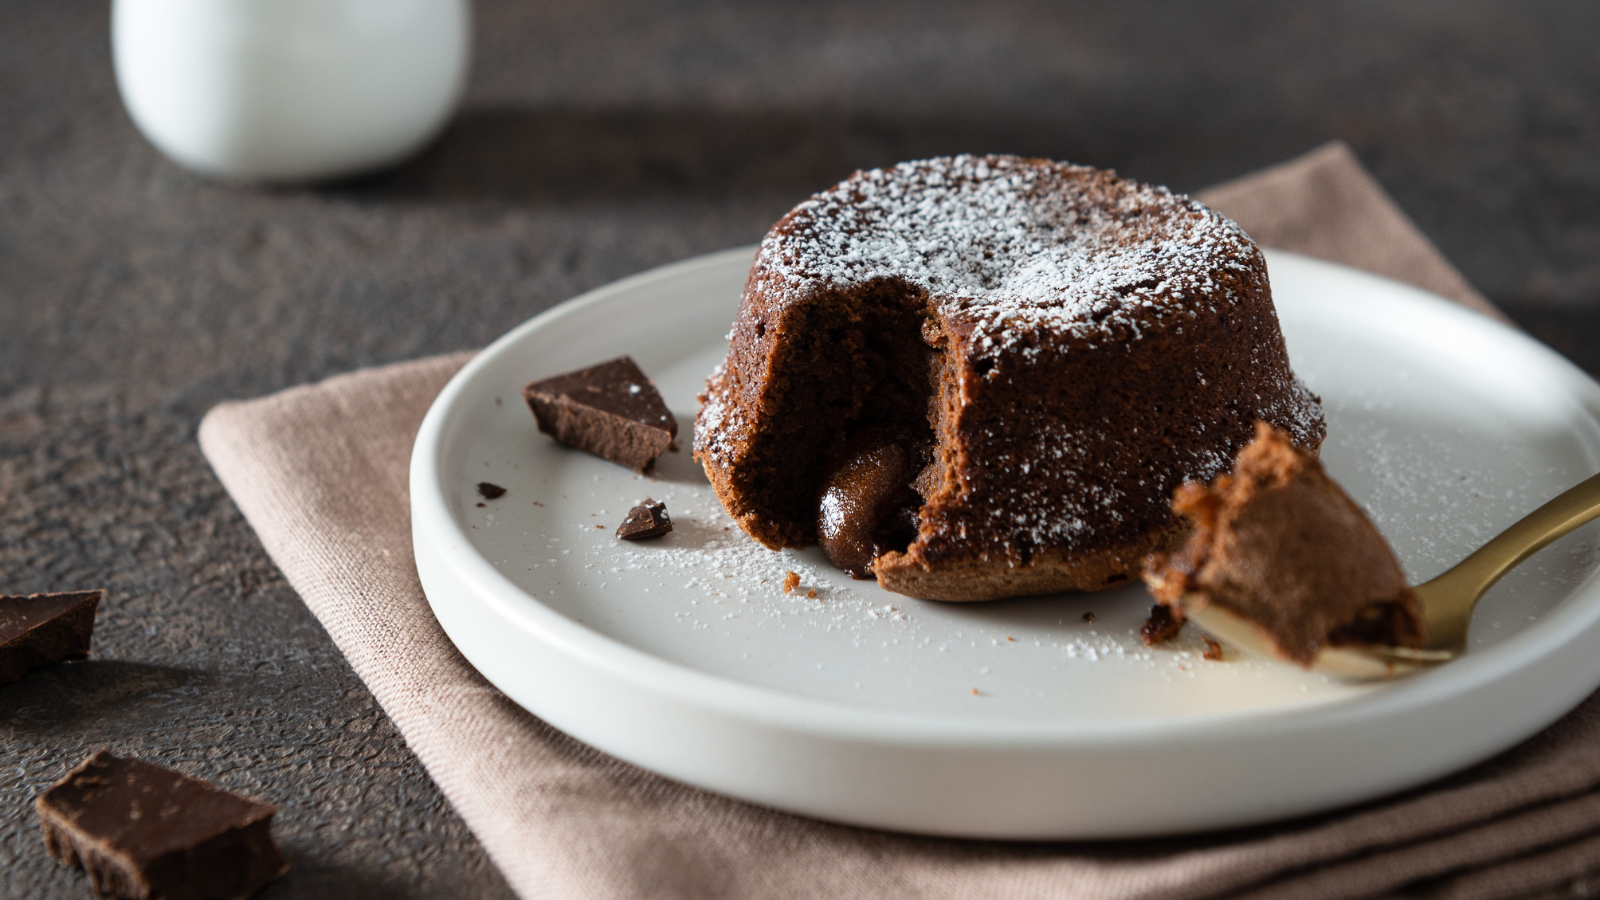 This ultra-light chocolate fondant recipe will make you not want to deprive yourself of dessert.